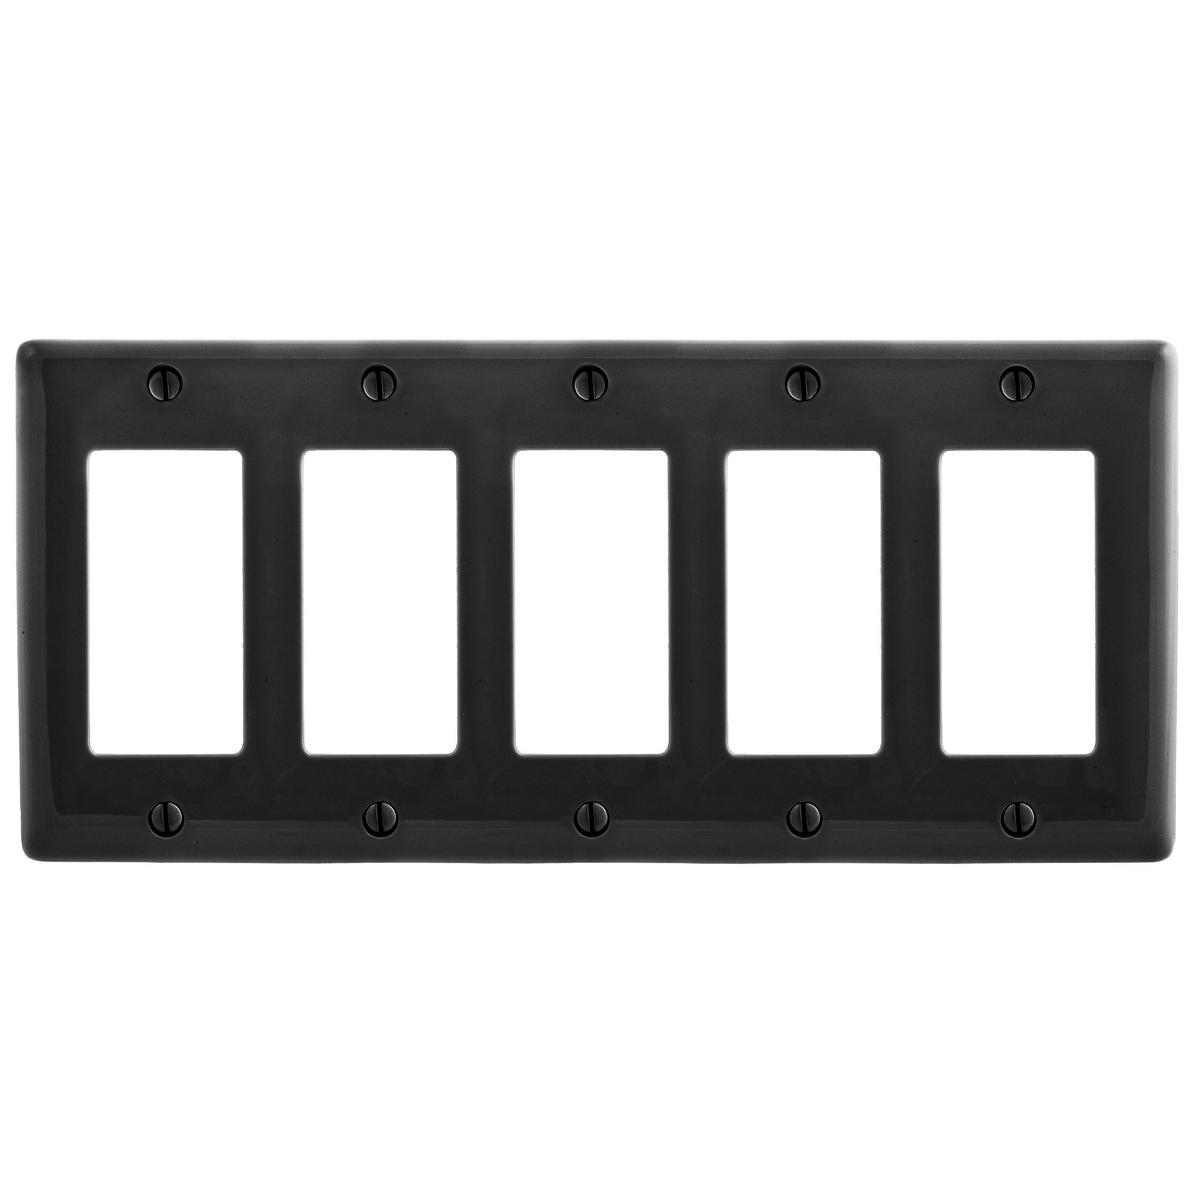 Hubbell NP265BK Wallplates and Box Covers, Wallplate, Nylon, 5-Gang, 5) Decorator, Black  ; Reinforcement ribs for extra strength ; High-impact, self-extinguishing nylon material ; Captive screw feature holds mounting screw in place ; Standard Size is 1/8" larger to give